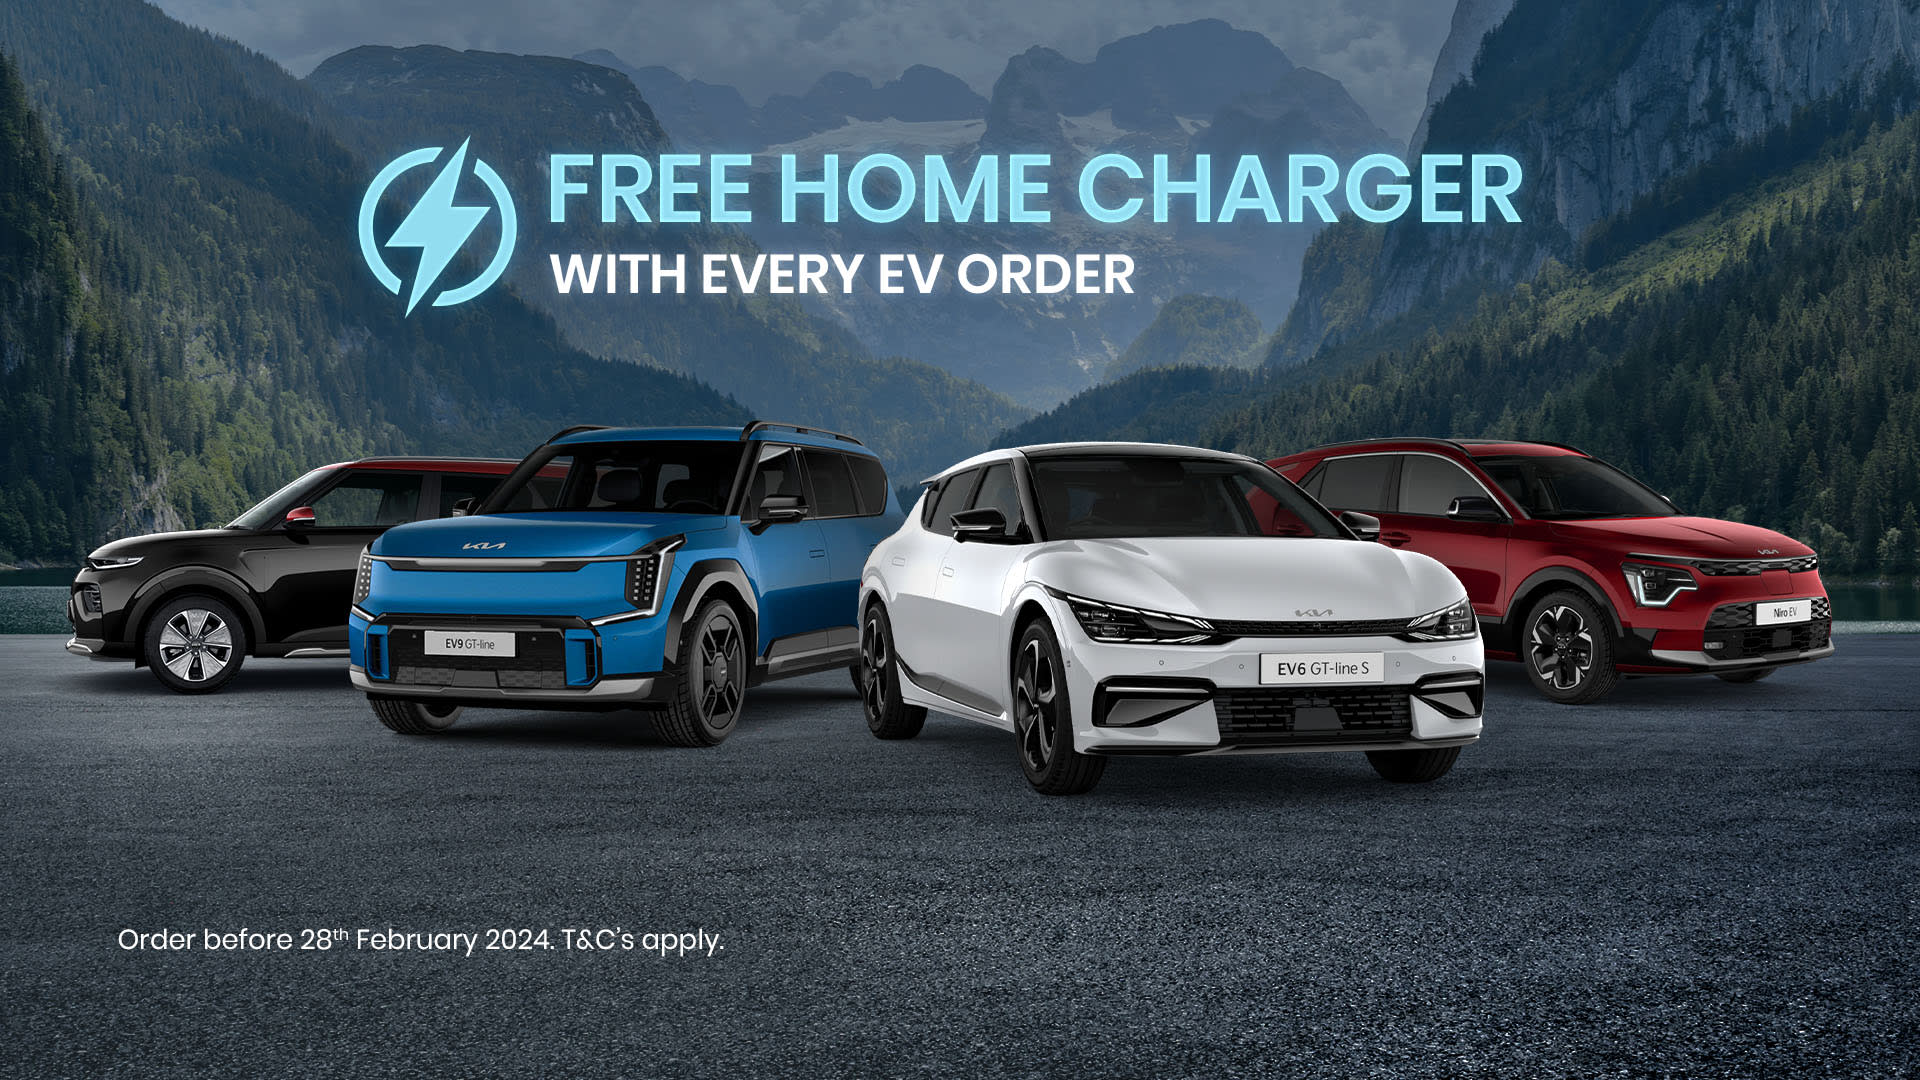 Free Home Charger